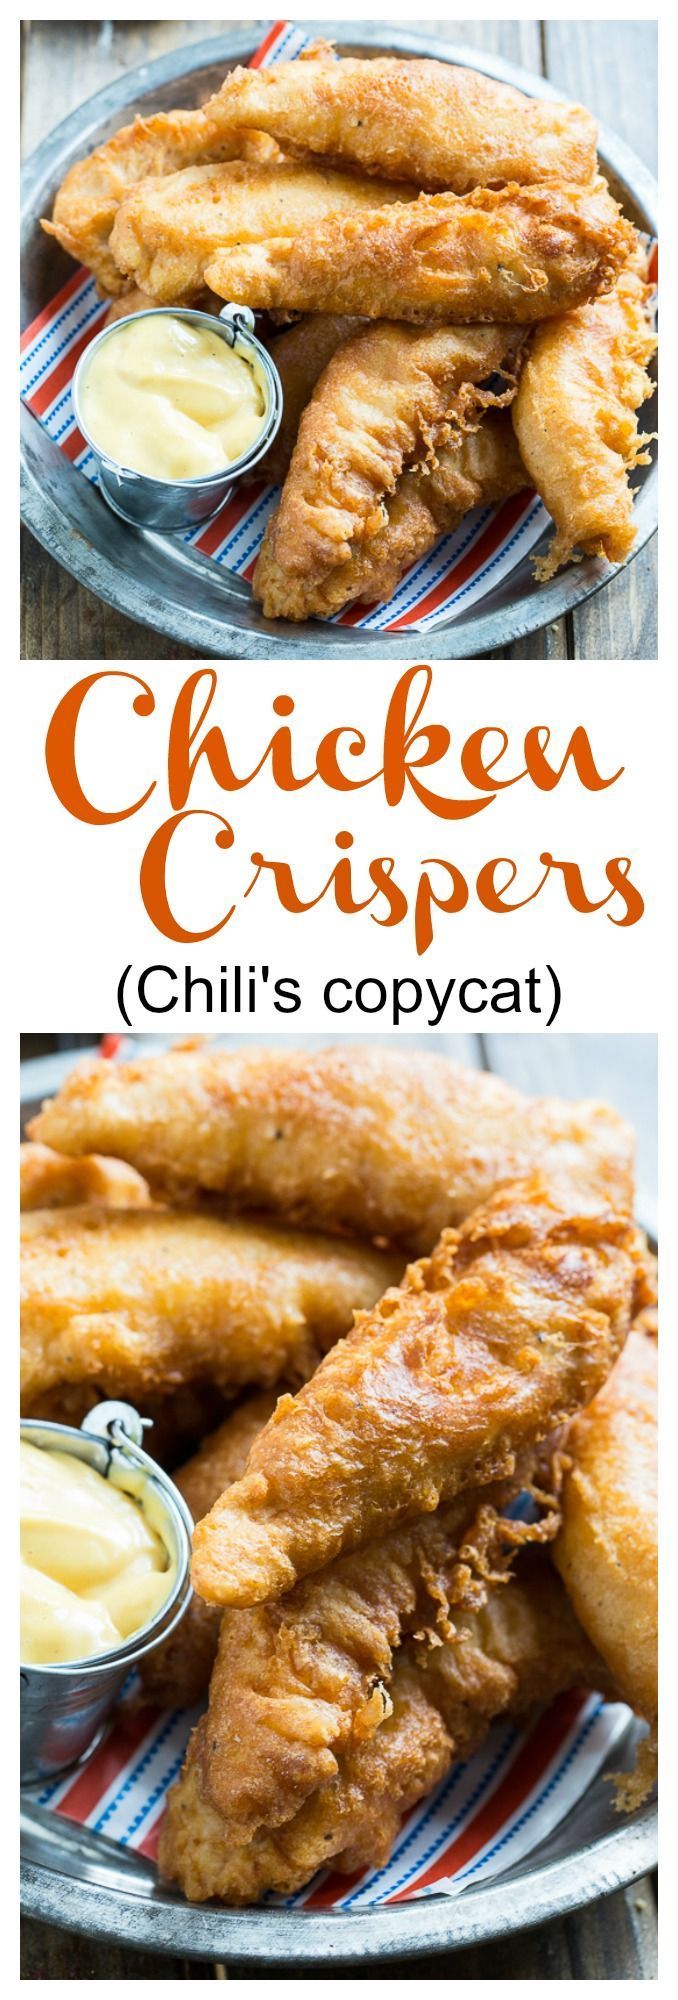 Chicken Crispers (Chili’s copycat) – super flavorful chicken tenders. This batter is really awesome and has a nontraditional